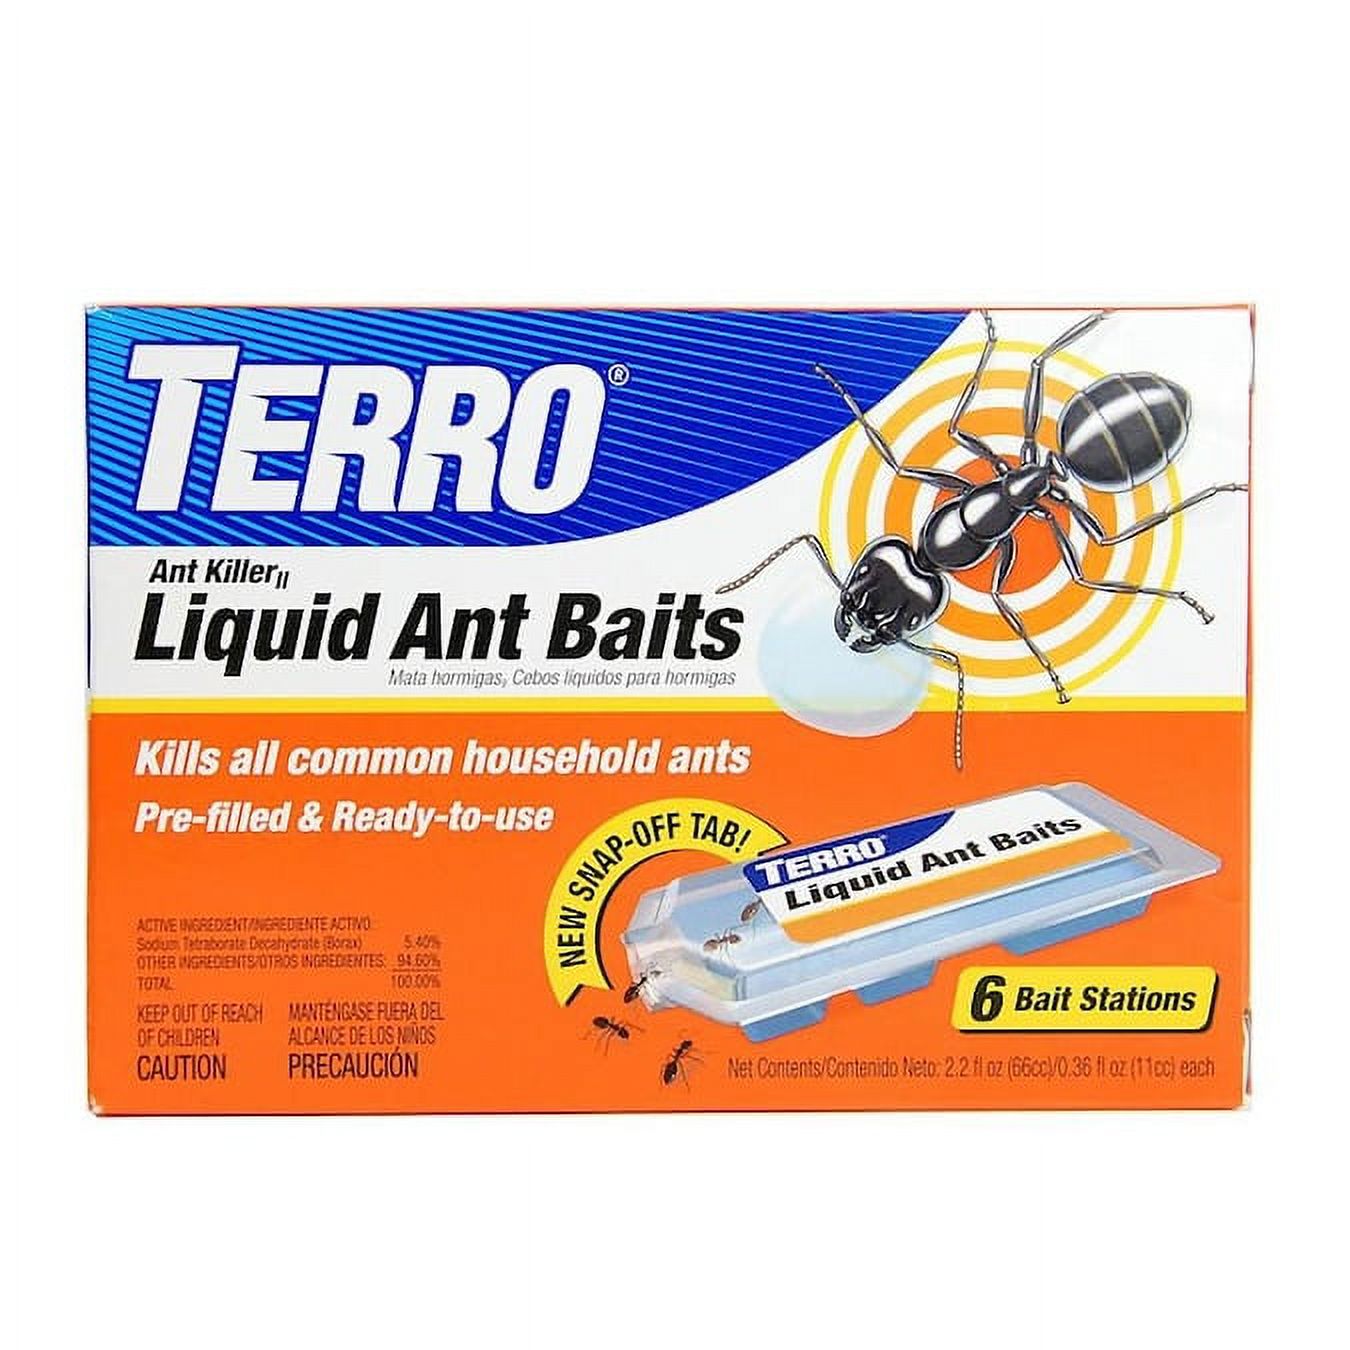 TERRO 6-Count Ant Bait Station (6-Pack) - image 1 of 1